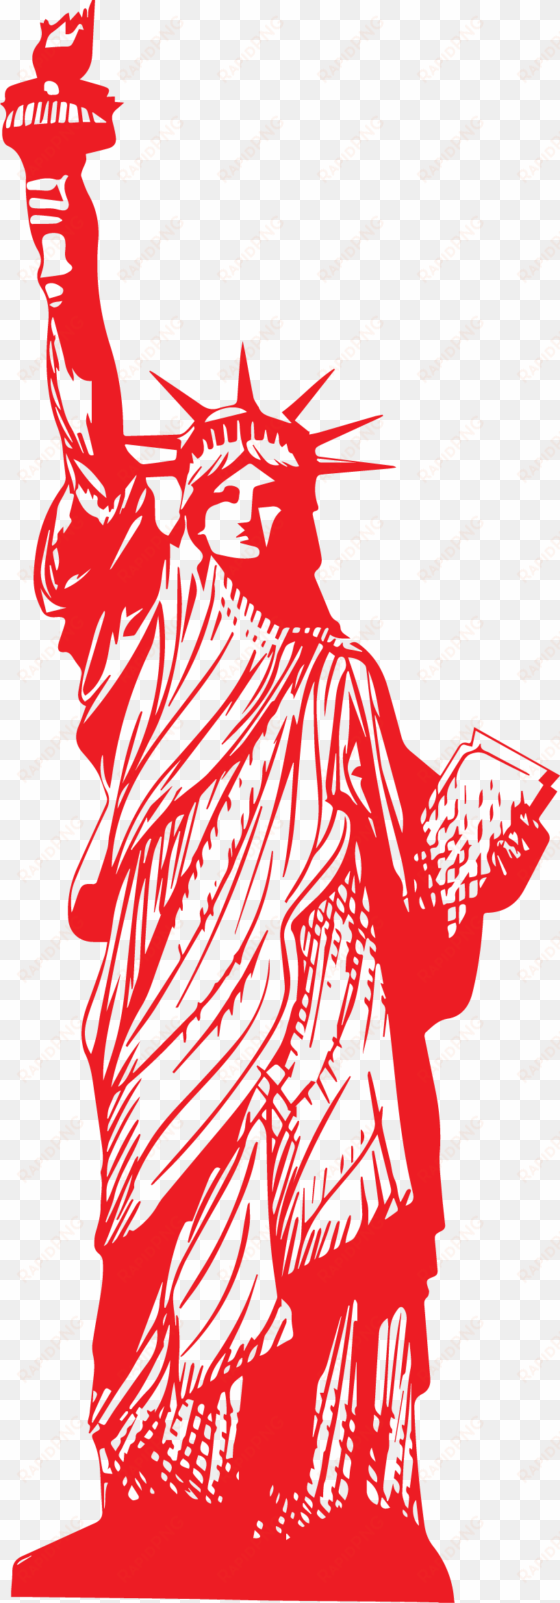 Statue Of Liberty Clipart Png - Statue Of Liberty Clip Art Red transparent png image